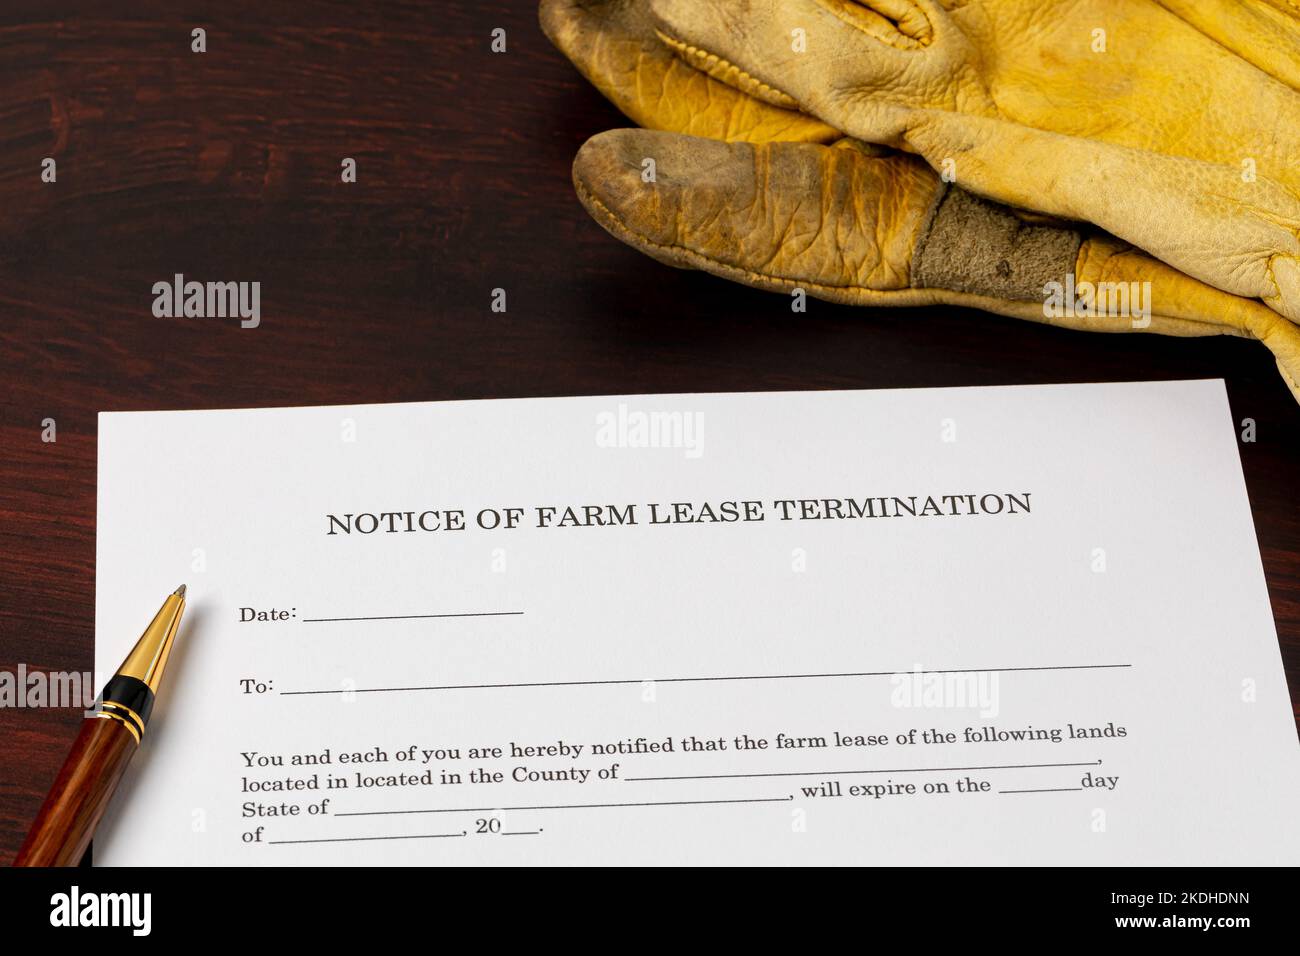 Cash rent farm lease termination letter with work gloves. Farming, agriculture and tenant farming concept. Stock Photo